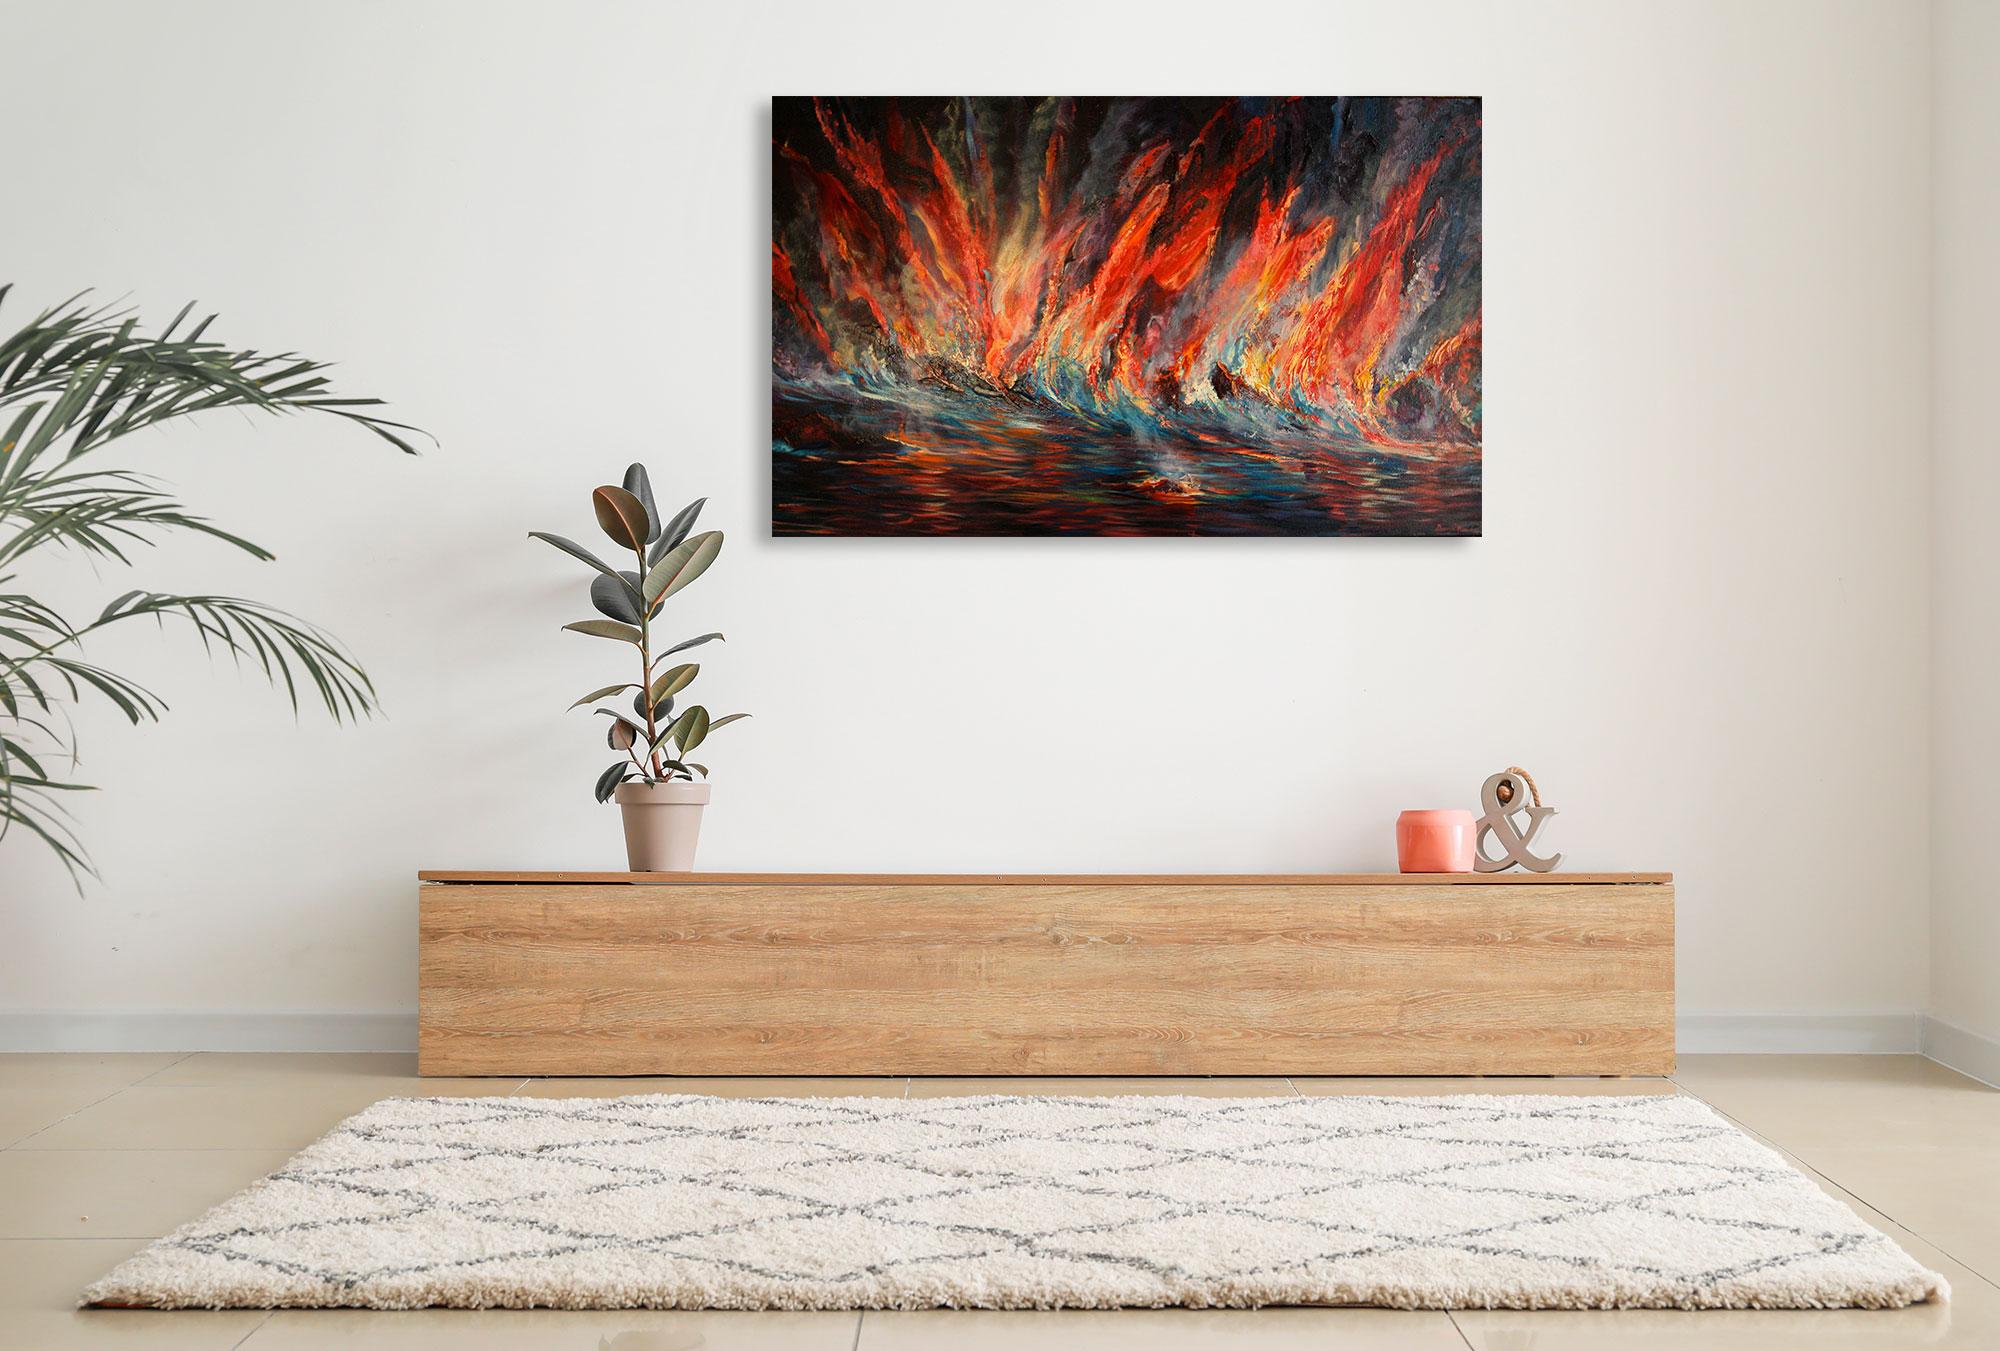 Lava Flow Into Sea - Hawaii - Oil On Canvas - Abstract Painting By Dante Rondo For Sale 1